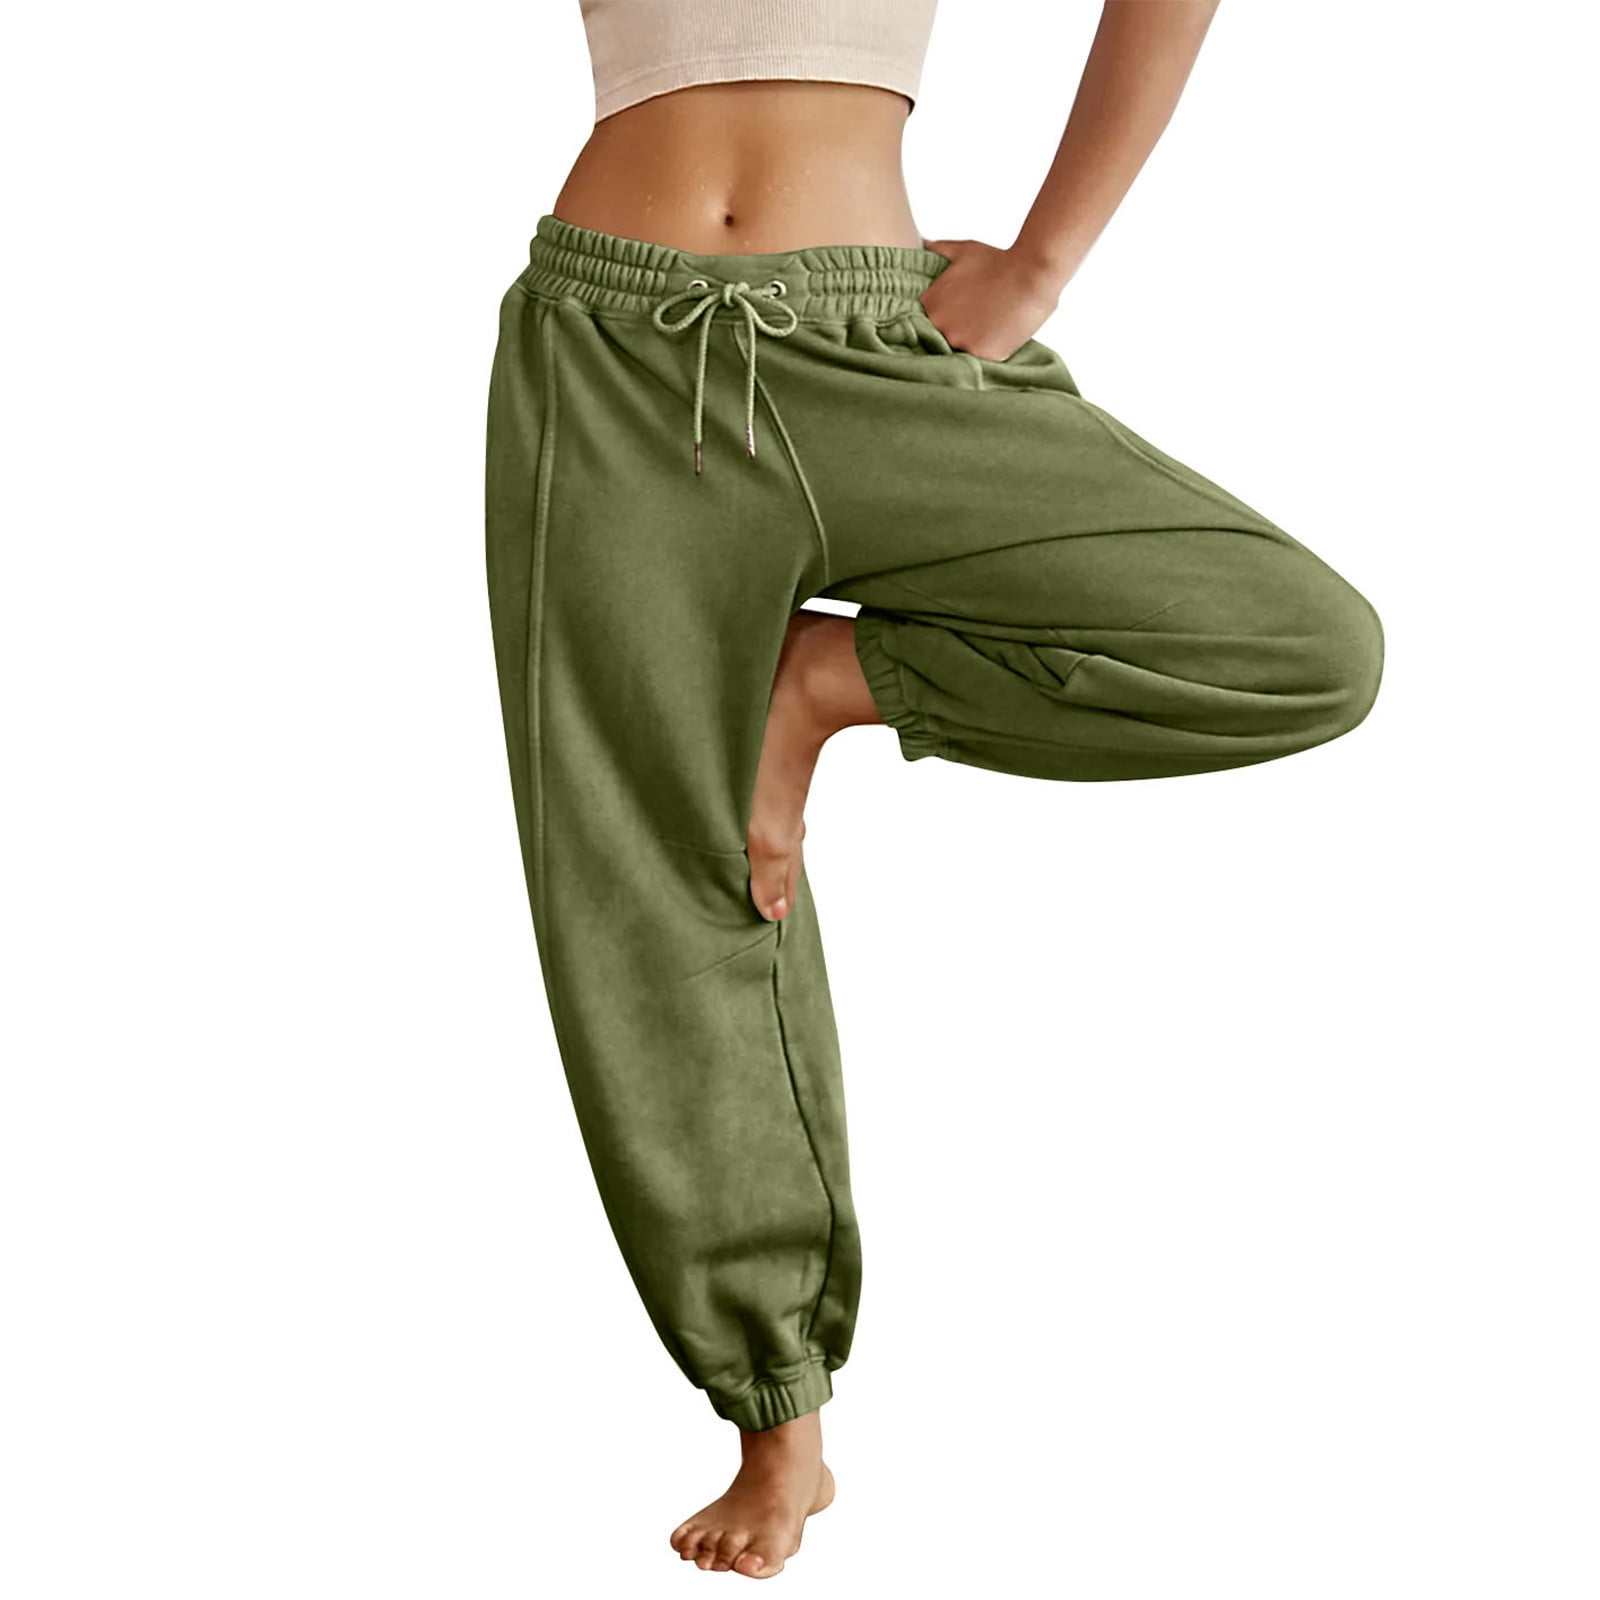 Women's High Waist Yoga Sweatpants, Best Yoga, Sports, Workout, Running &  Training Sweatpants for Sale at the Lowest Prices – SHEJOLLY